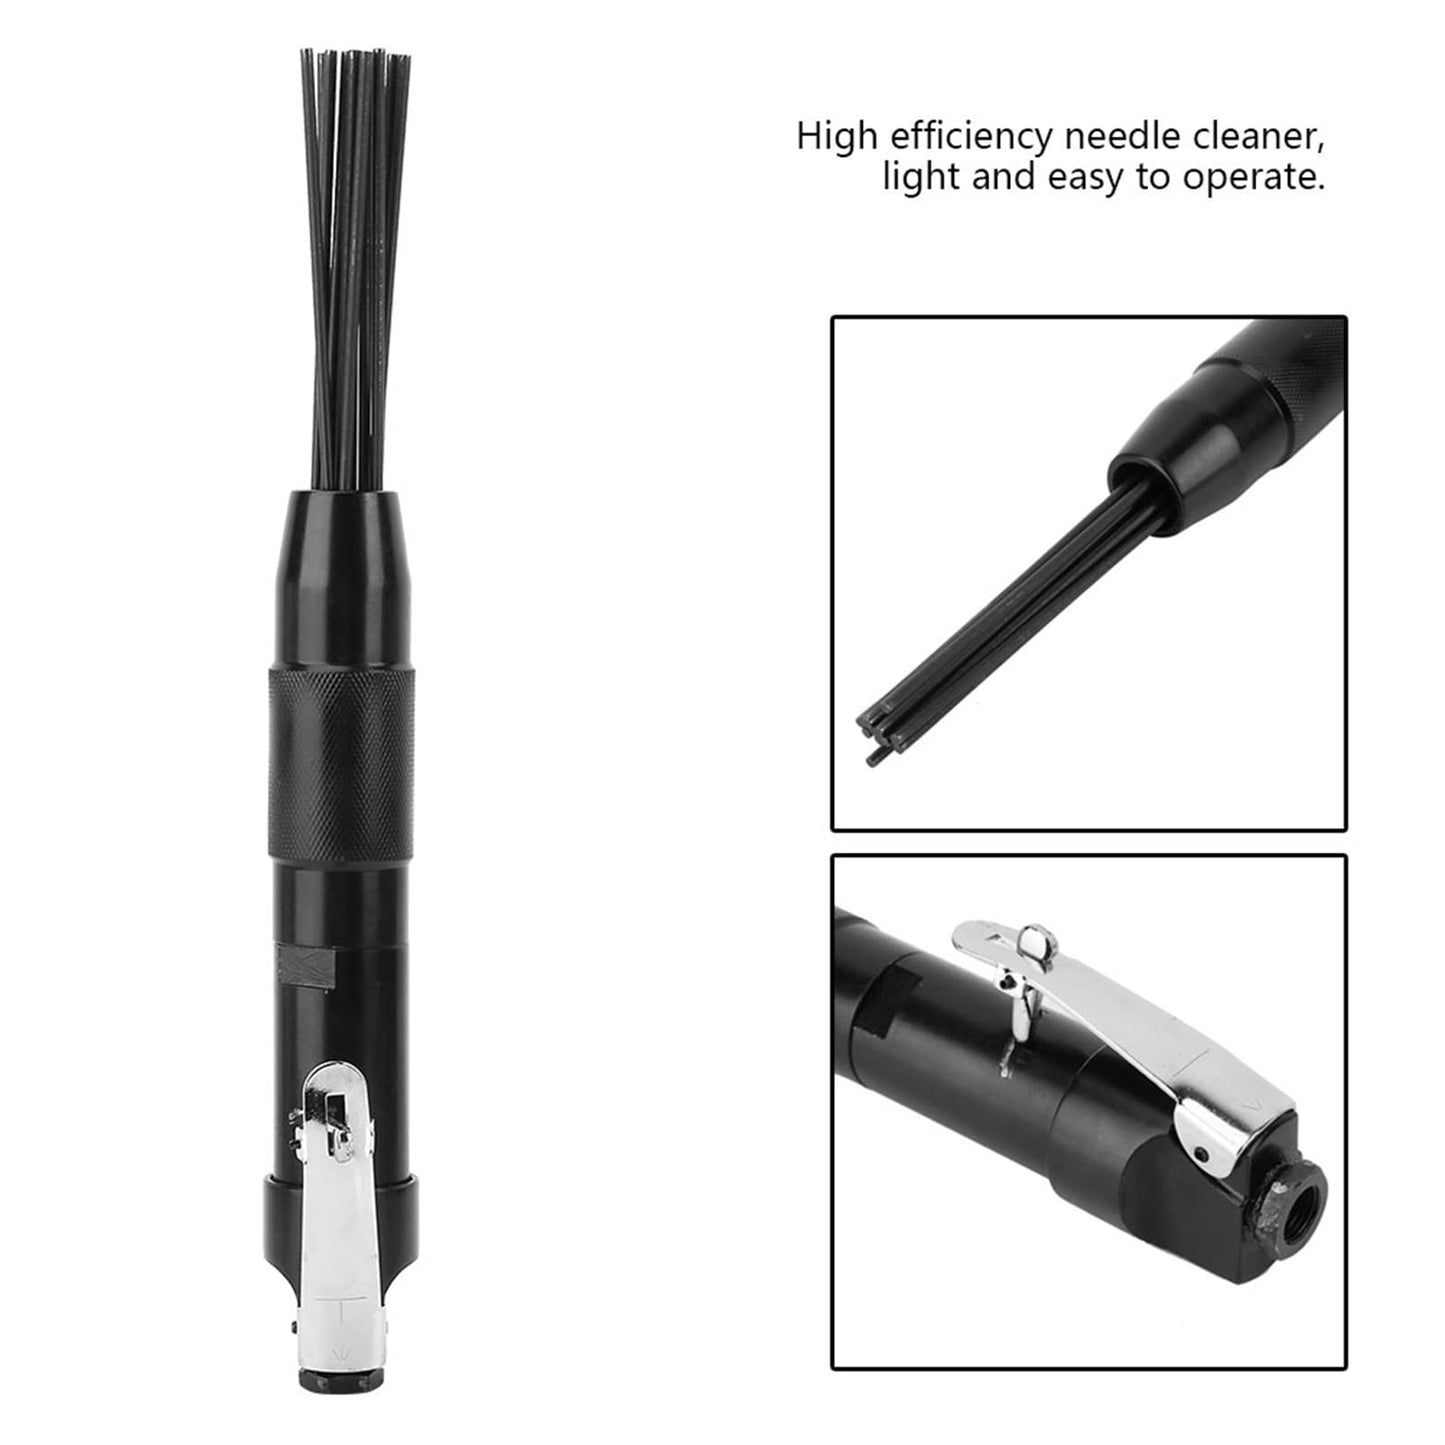 Needle Scaler Attachment, 1/4 4400 RPM Pneumatic Needle Scaler, Descaler for Air Chisel Paint Removing Deburring